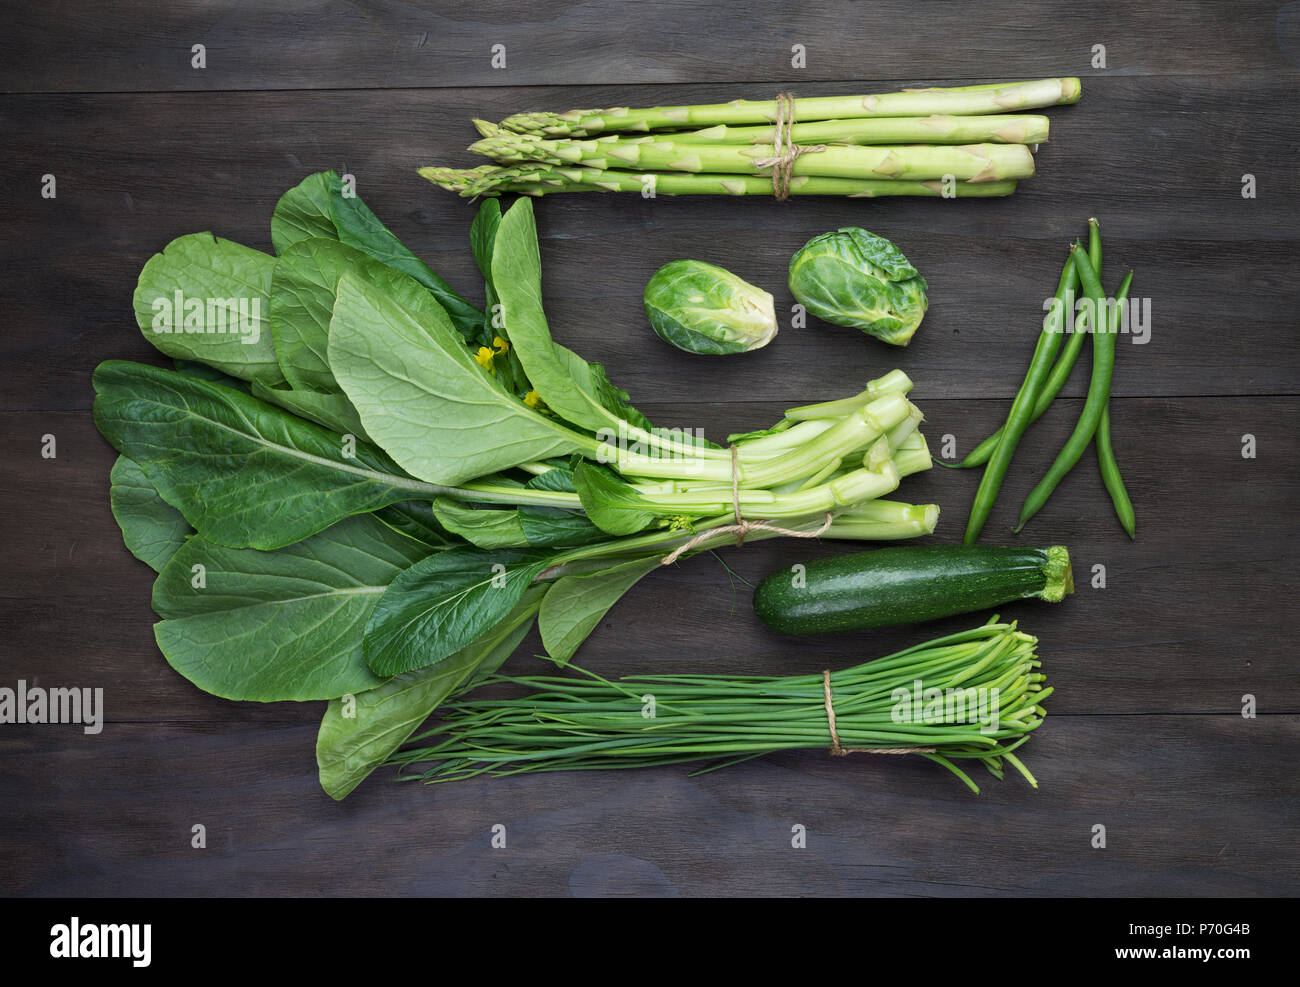 Fresh green organic vegetables on black wooden vintage table.Top view Stock Photo